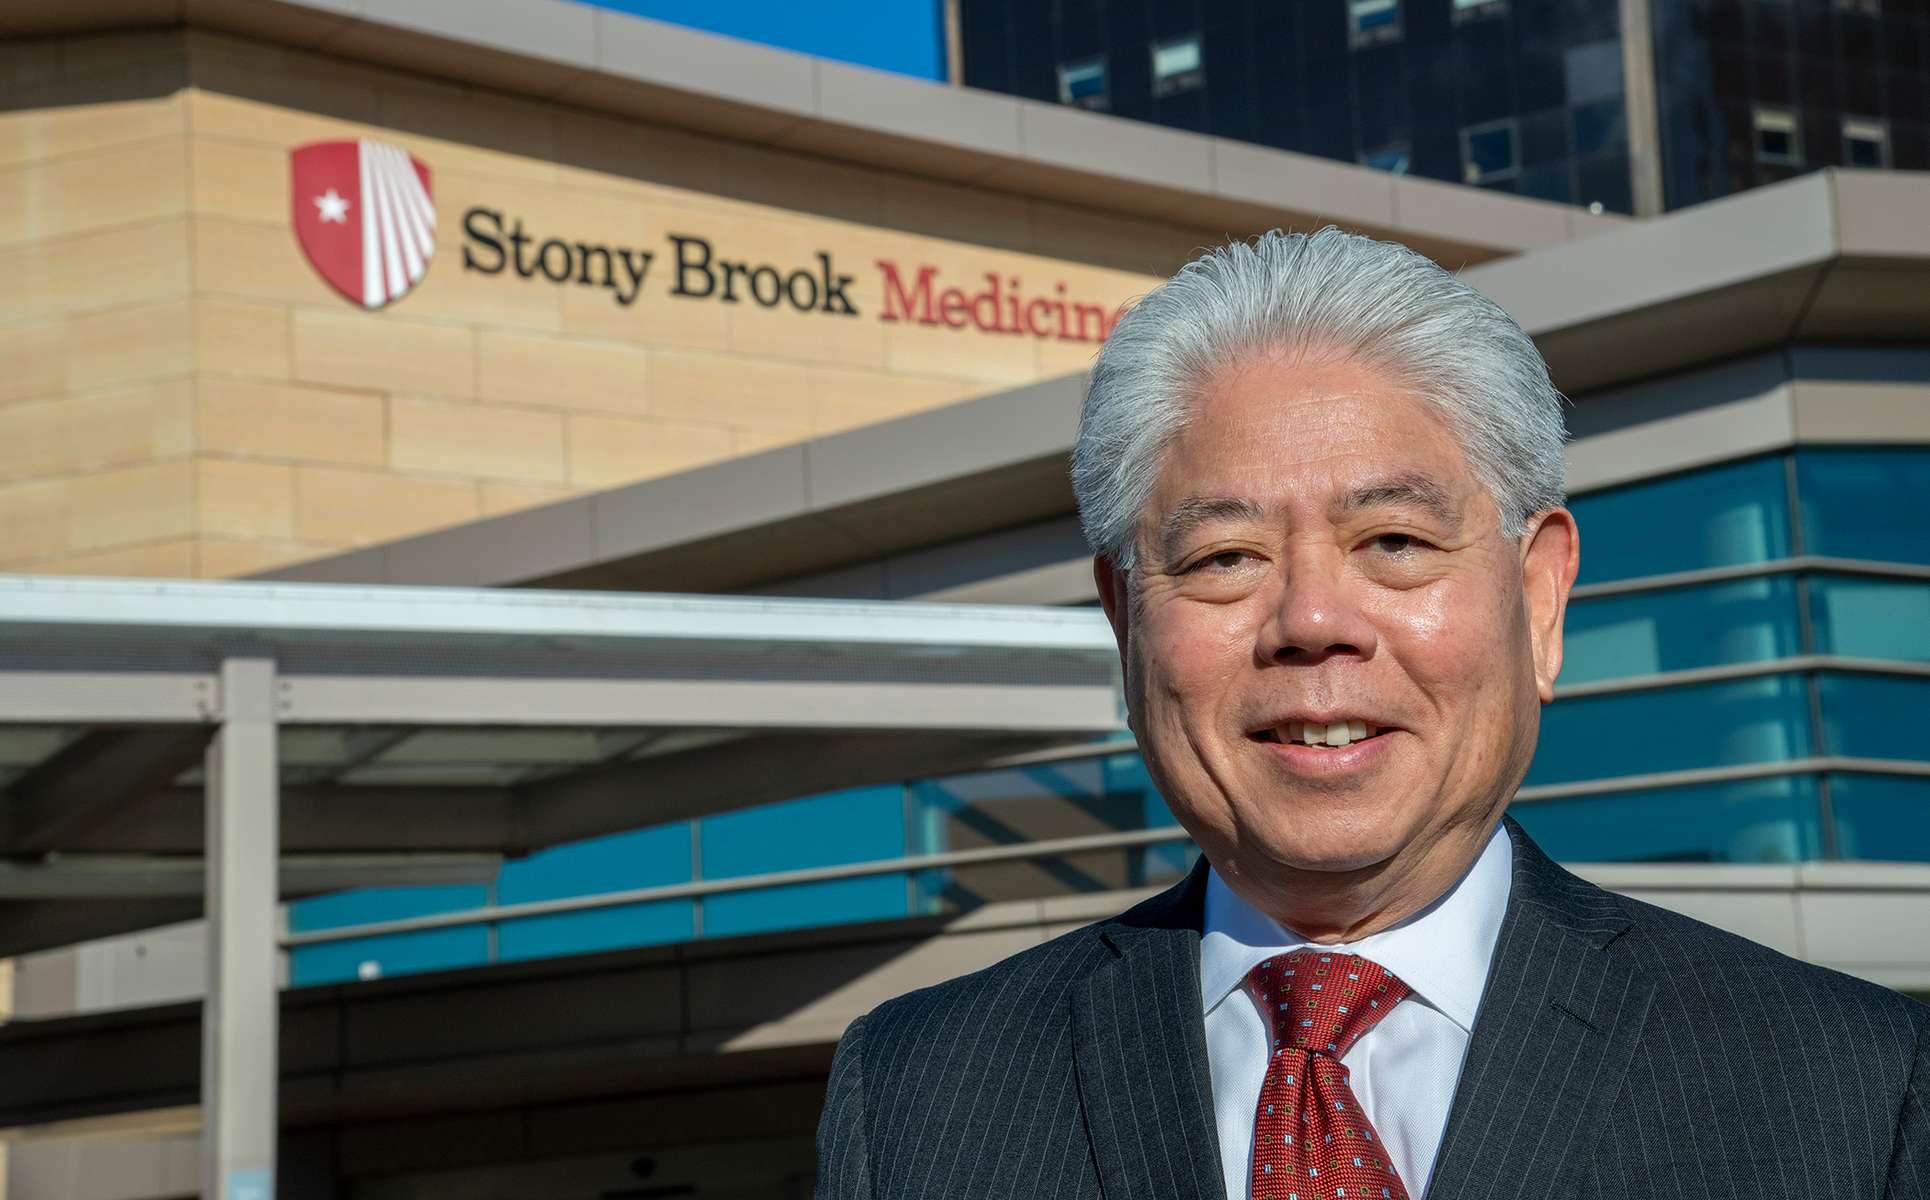 Dr. Peter Igarashi has been named the new dean of the Renaissance School of Medicine at Stony Brook University. photographed in front of the hospital. October 11, 2022